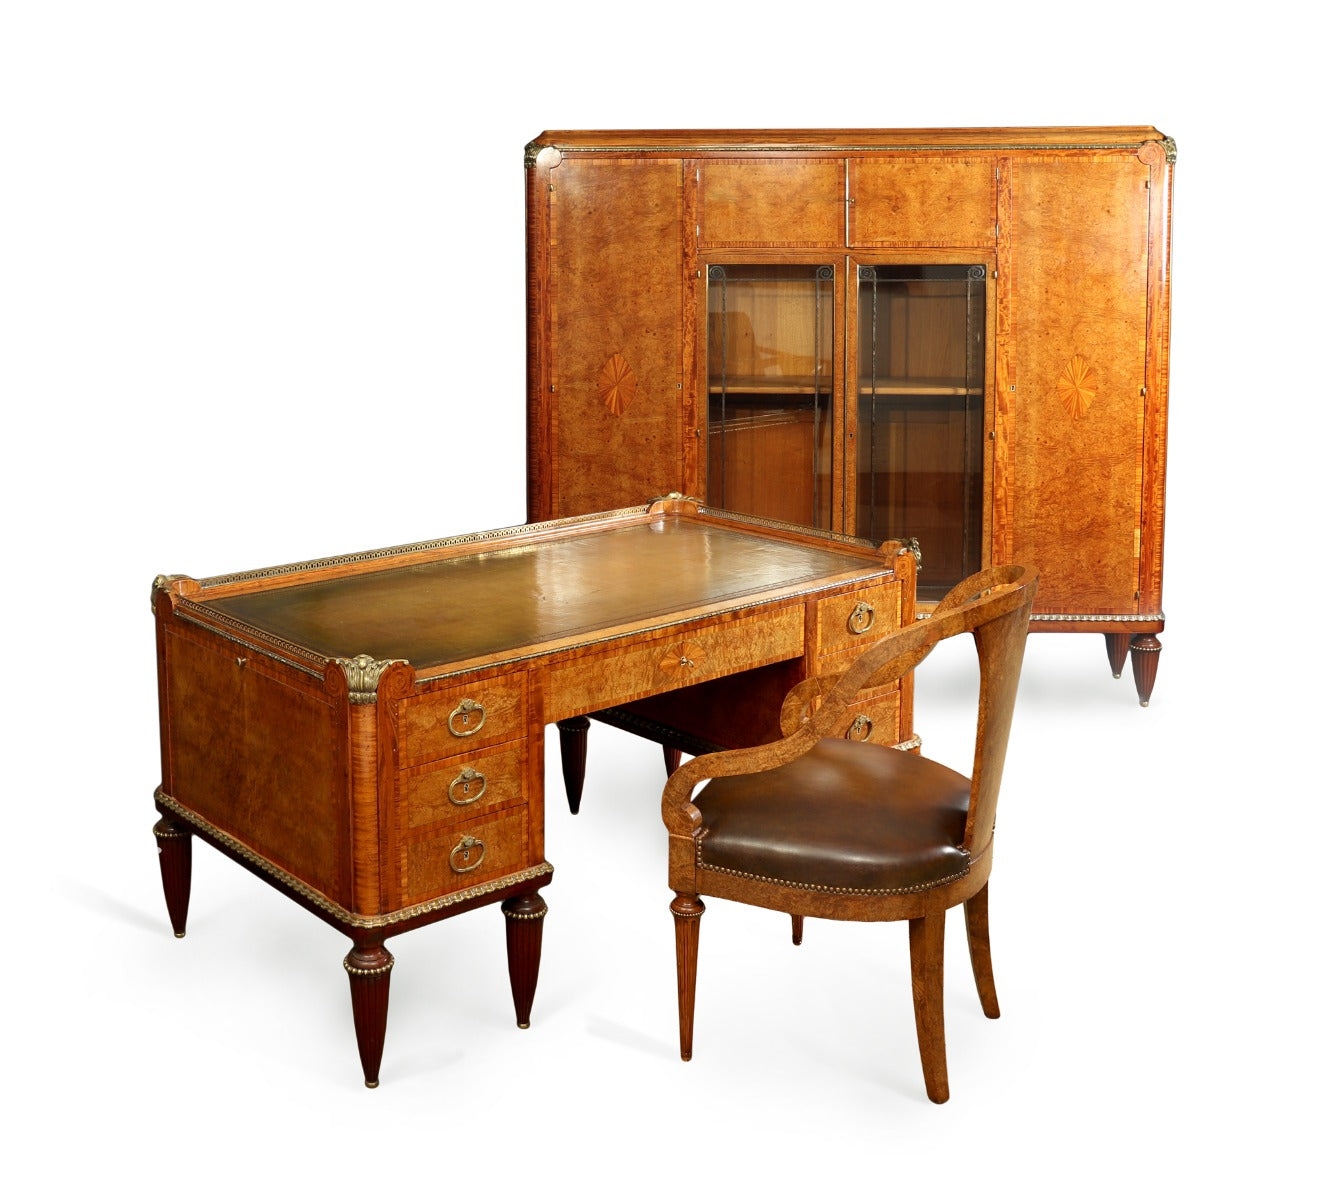 Art Deco Desk, Chair by Maurice Dufrene – The Furniture Rooms